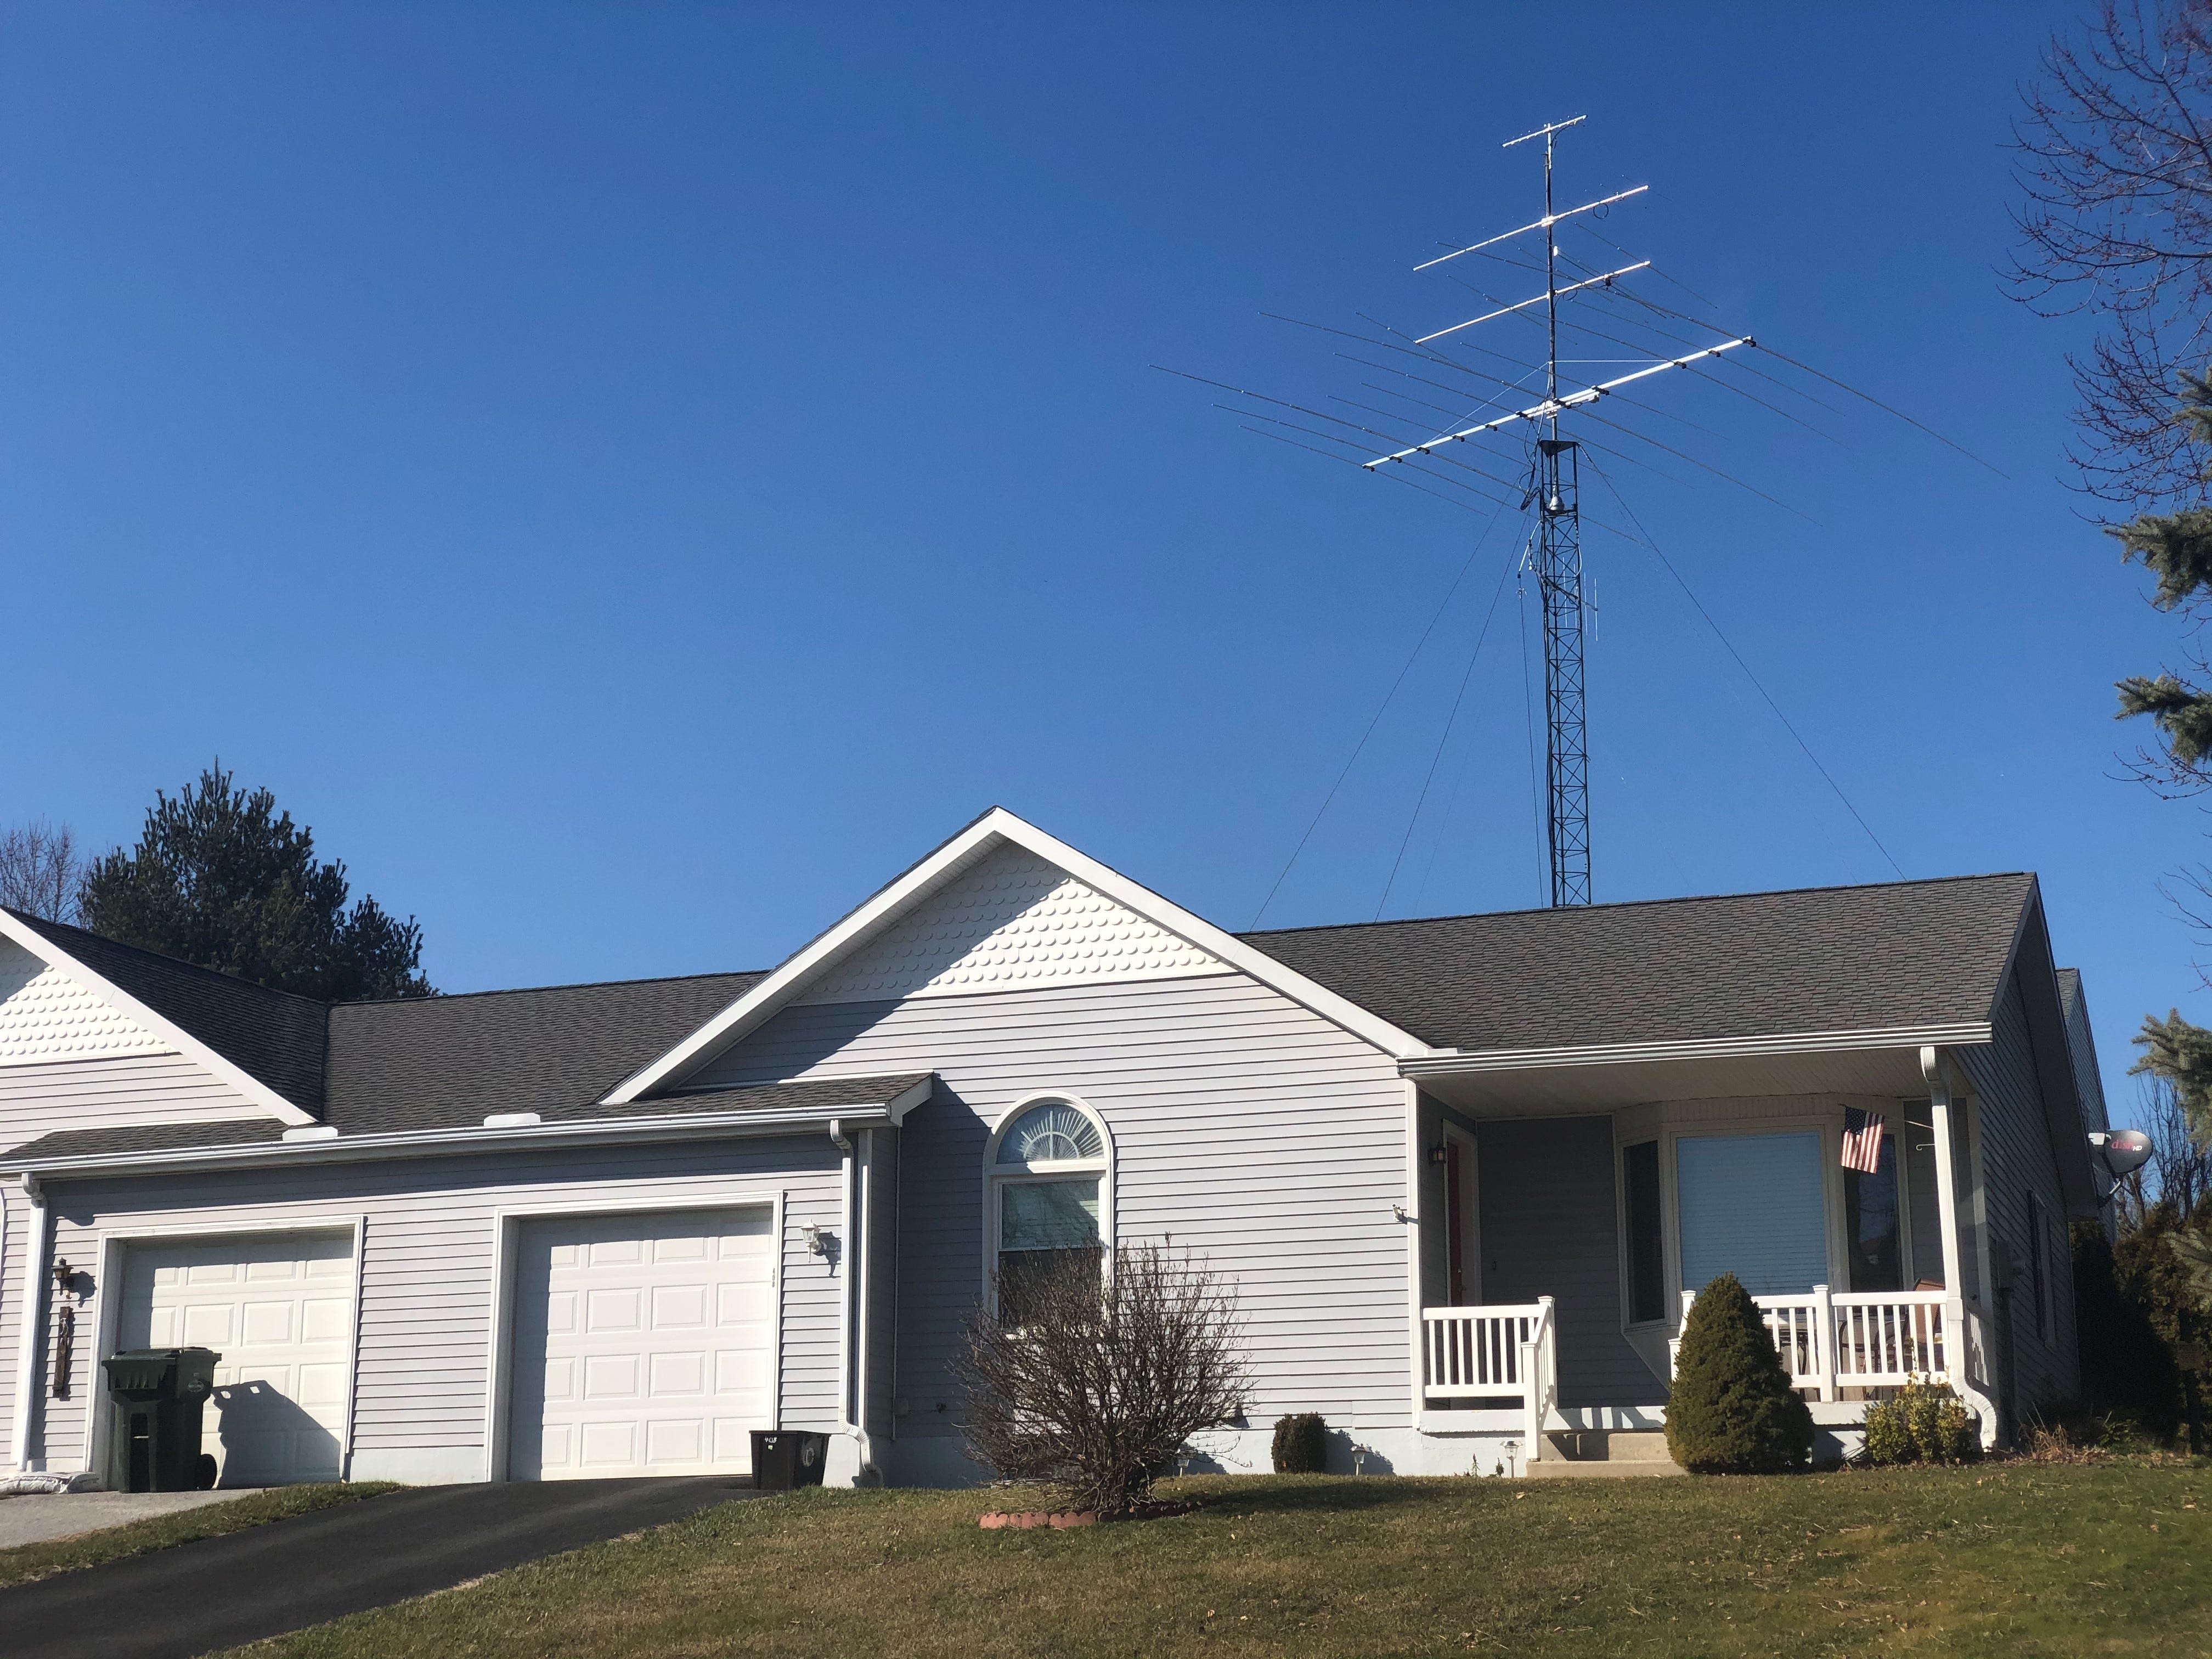 Residents of White Rose Lane in Windsor Township are upset about this amateur radio tower in their neighbor's yard.